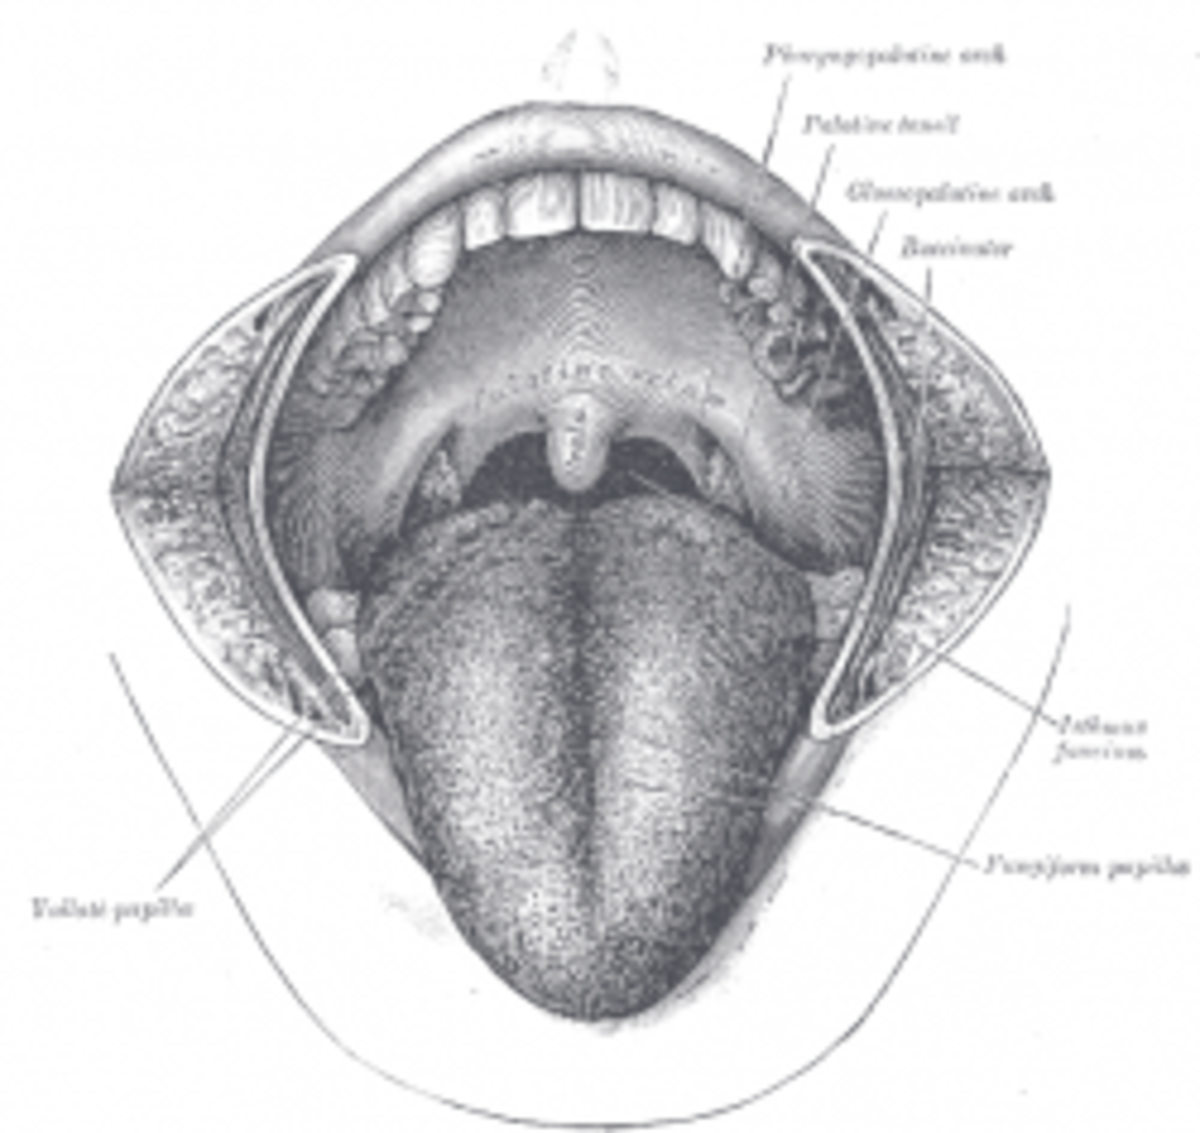 tonsilloliths-identifying-and-treating-tonsil-stones